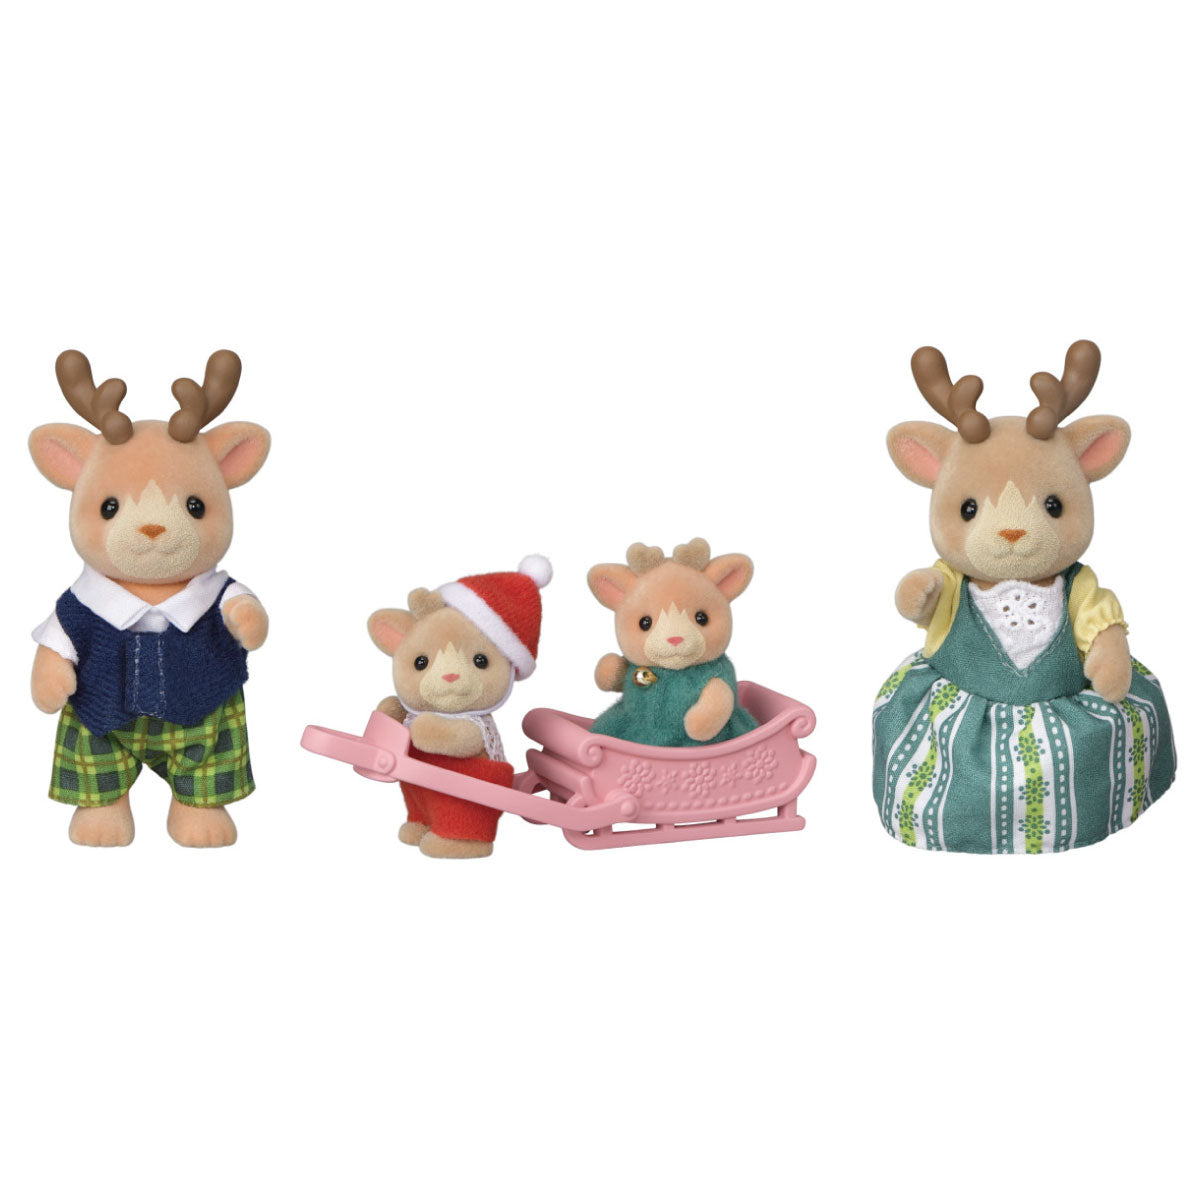 Calico Critters Reindeer Family